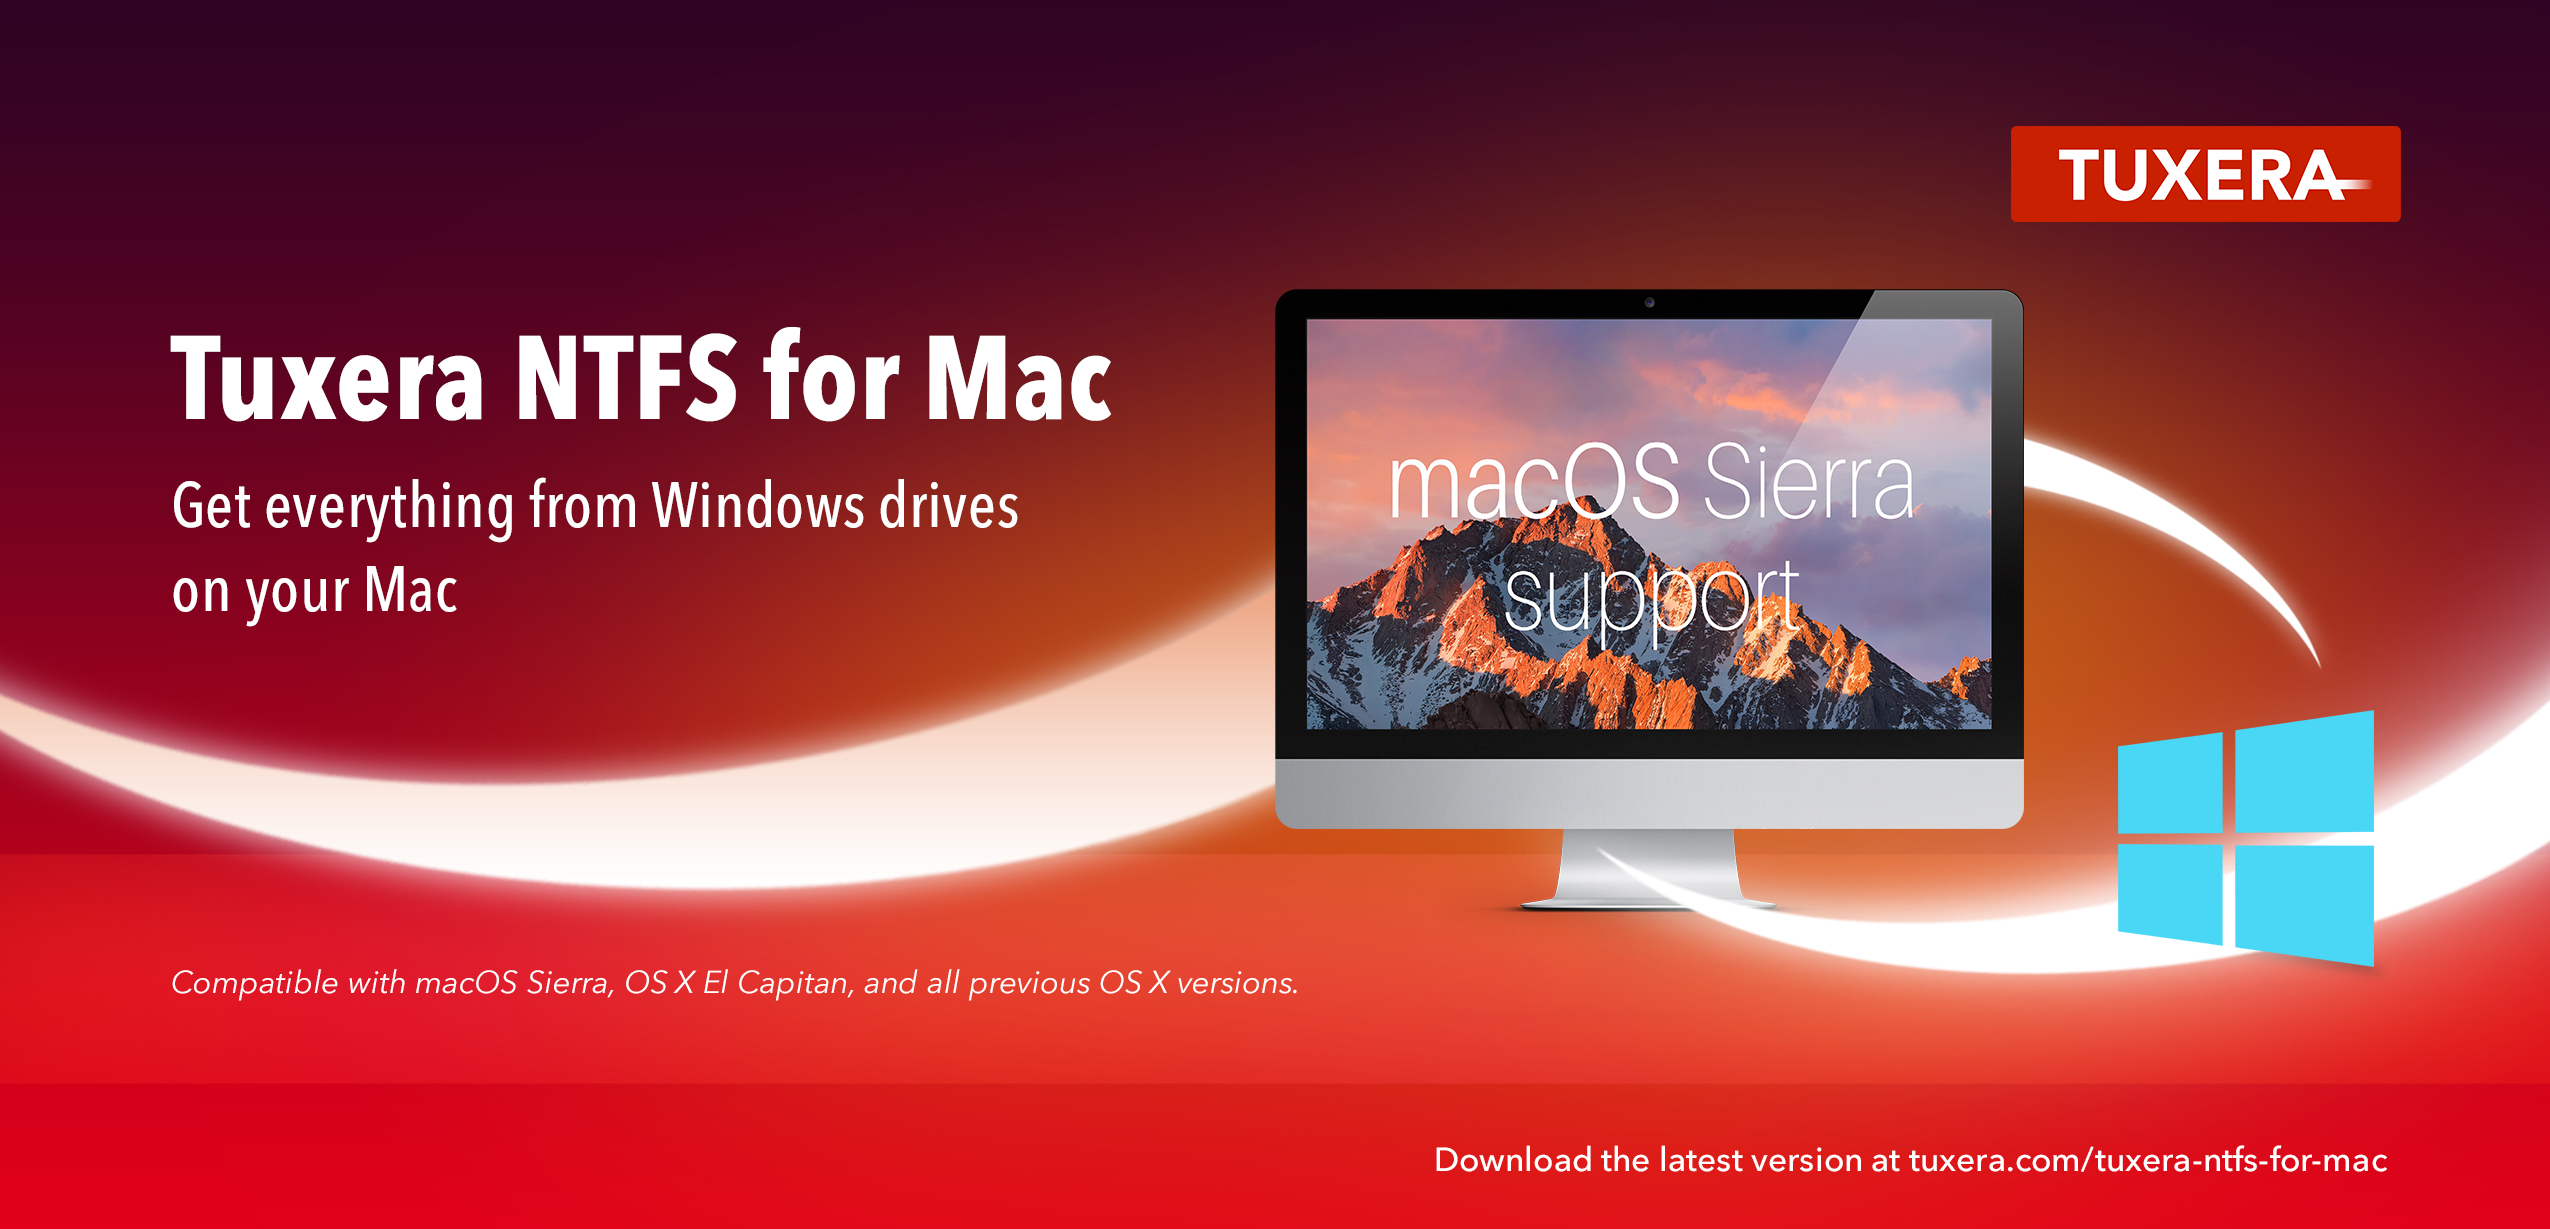 How Much For The Latest Mac Os Sierra